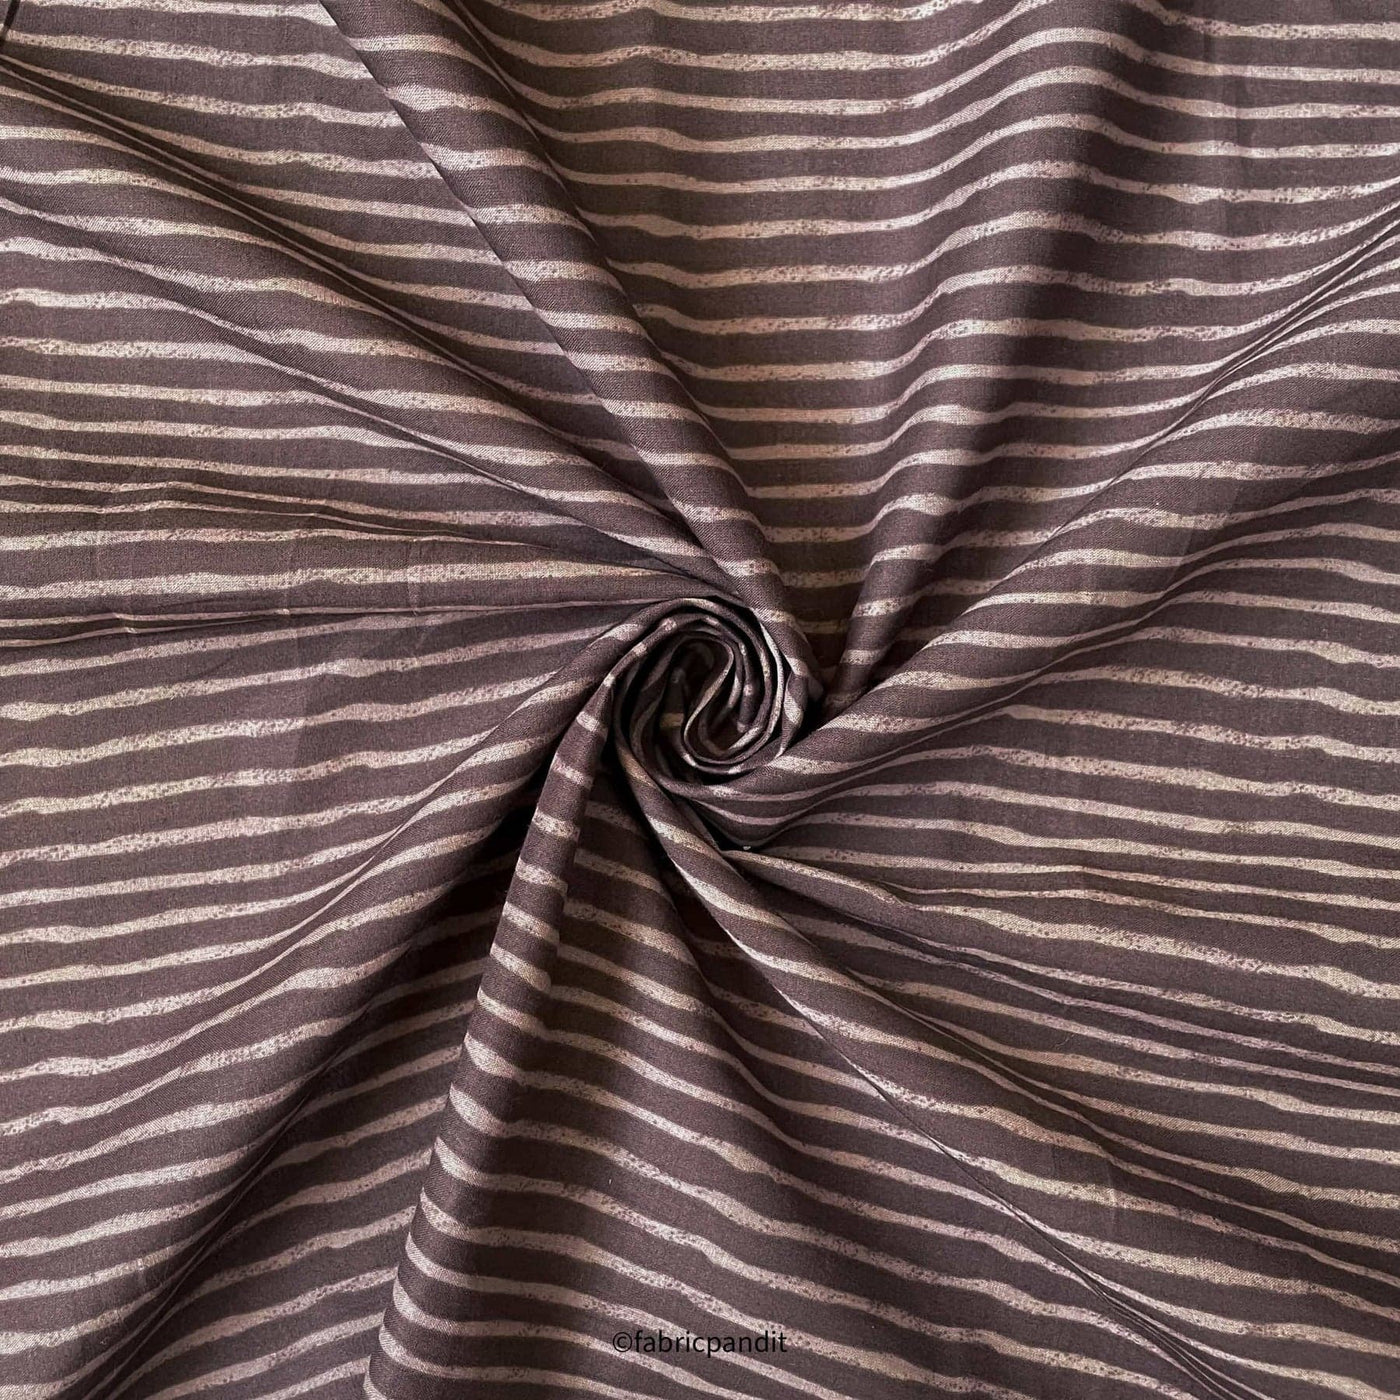 Hand Block Printed Cotton Fabric Cut Piece (CUT PIECE) Metallic Brown Rough Stripes Hand Block Printed Pure Cotton Fabric (Width 42 inches)